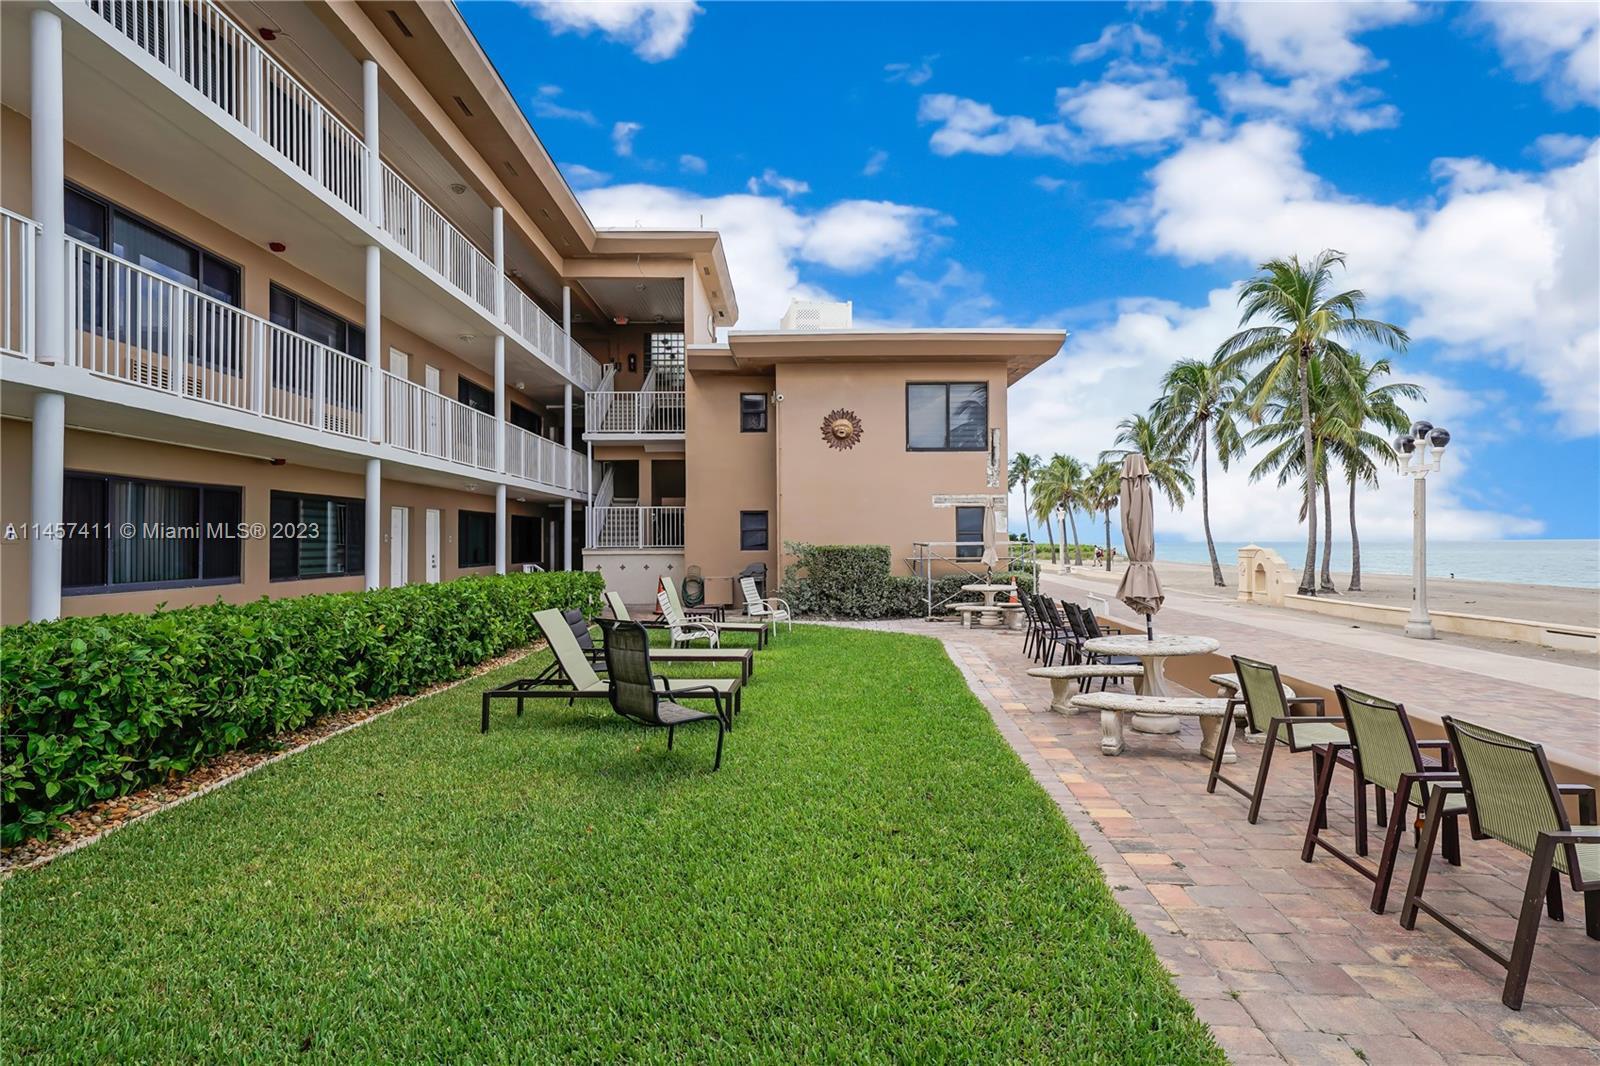 Live the dream oceanfront living, gorgeous view from your own condo! Casual beach style living at it